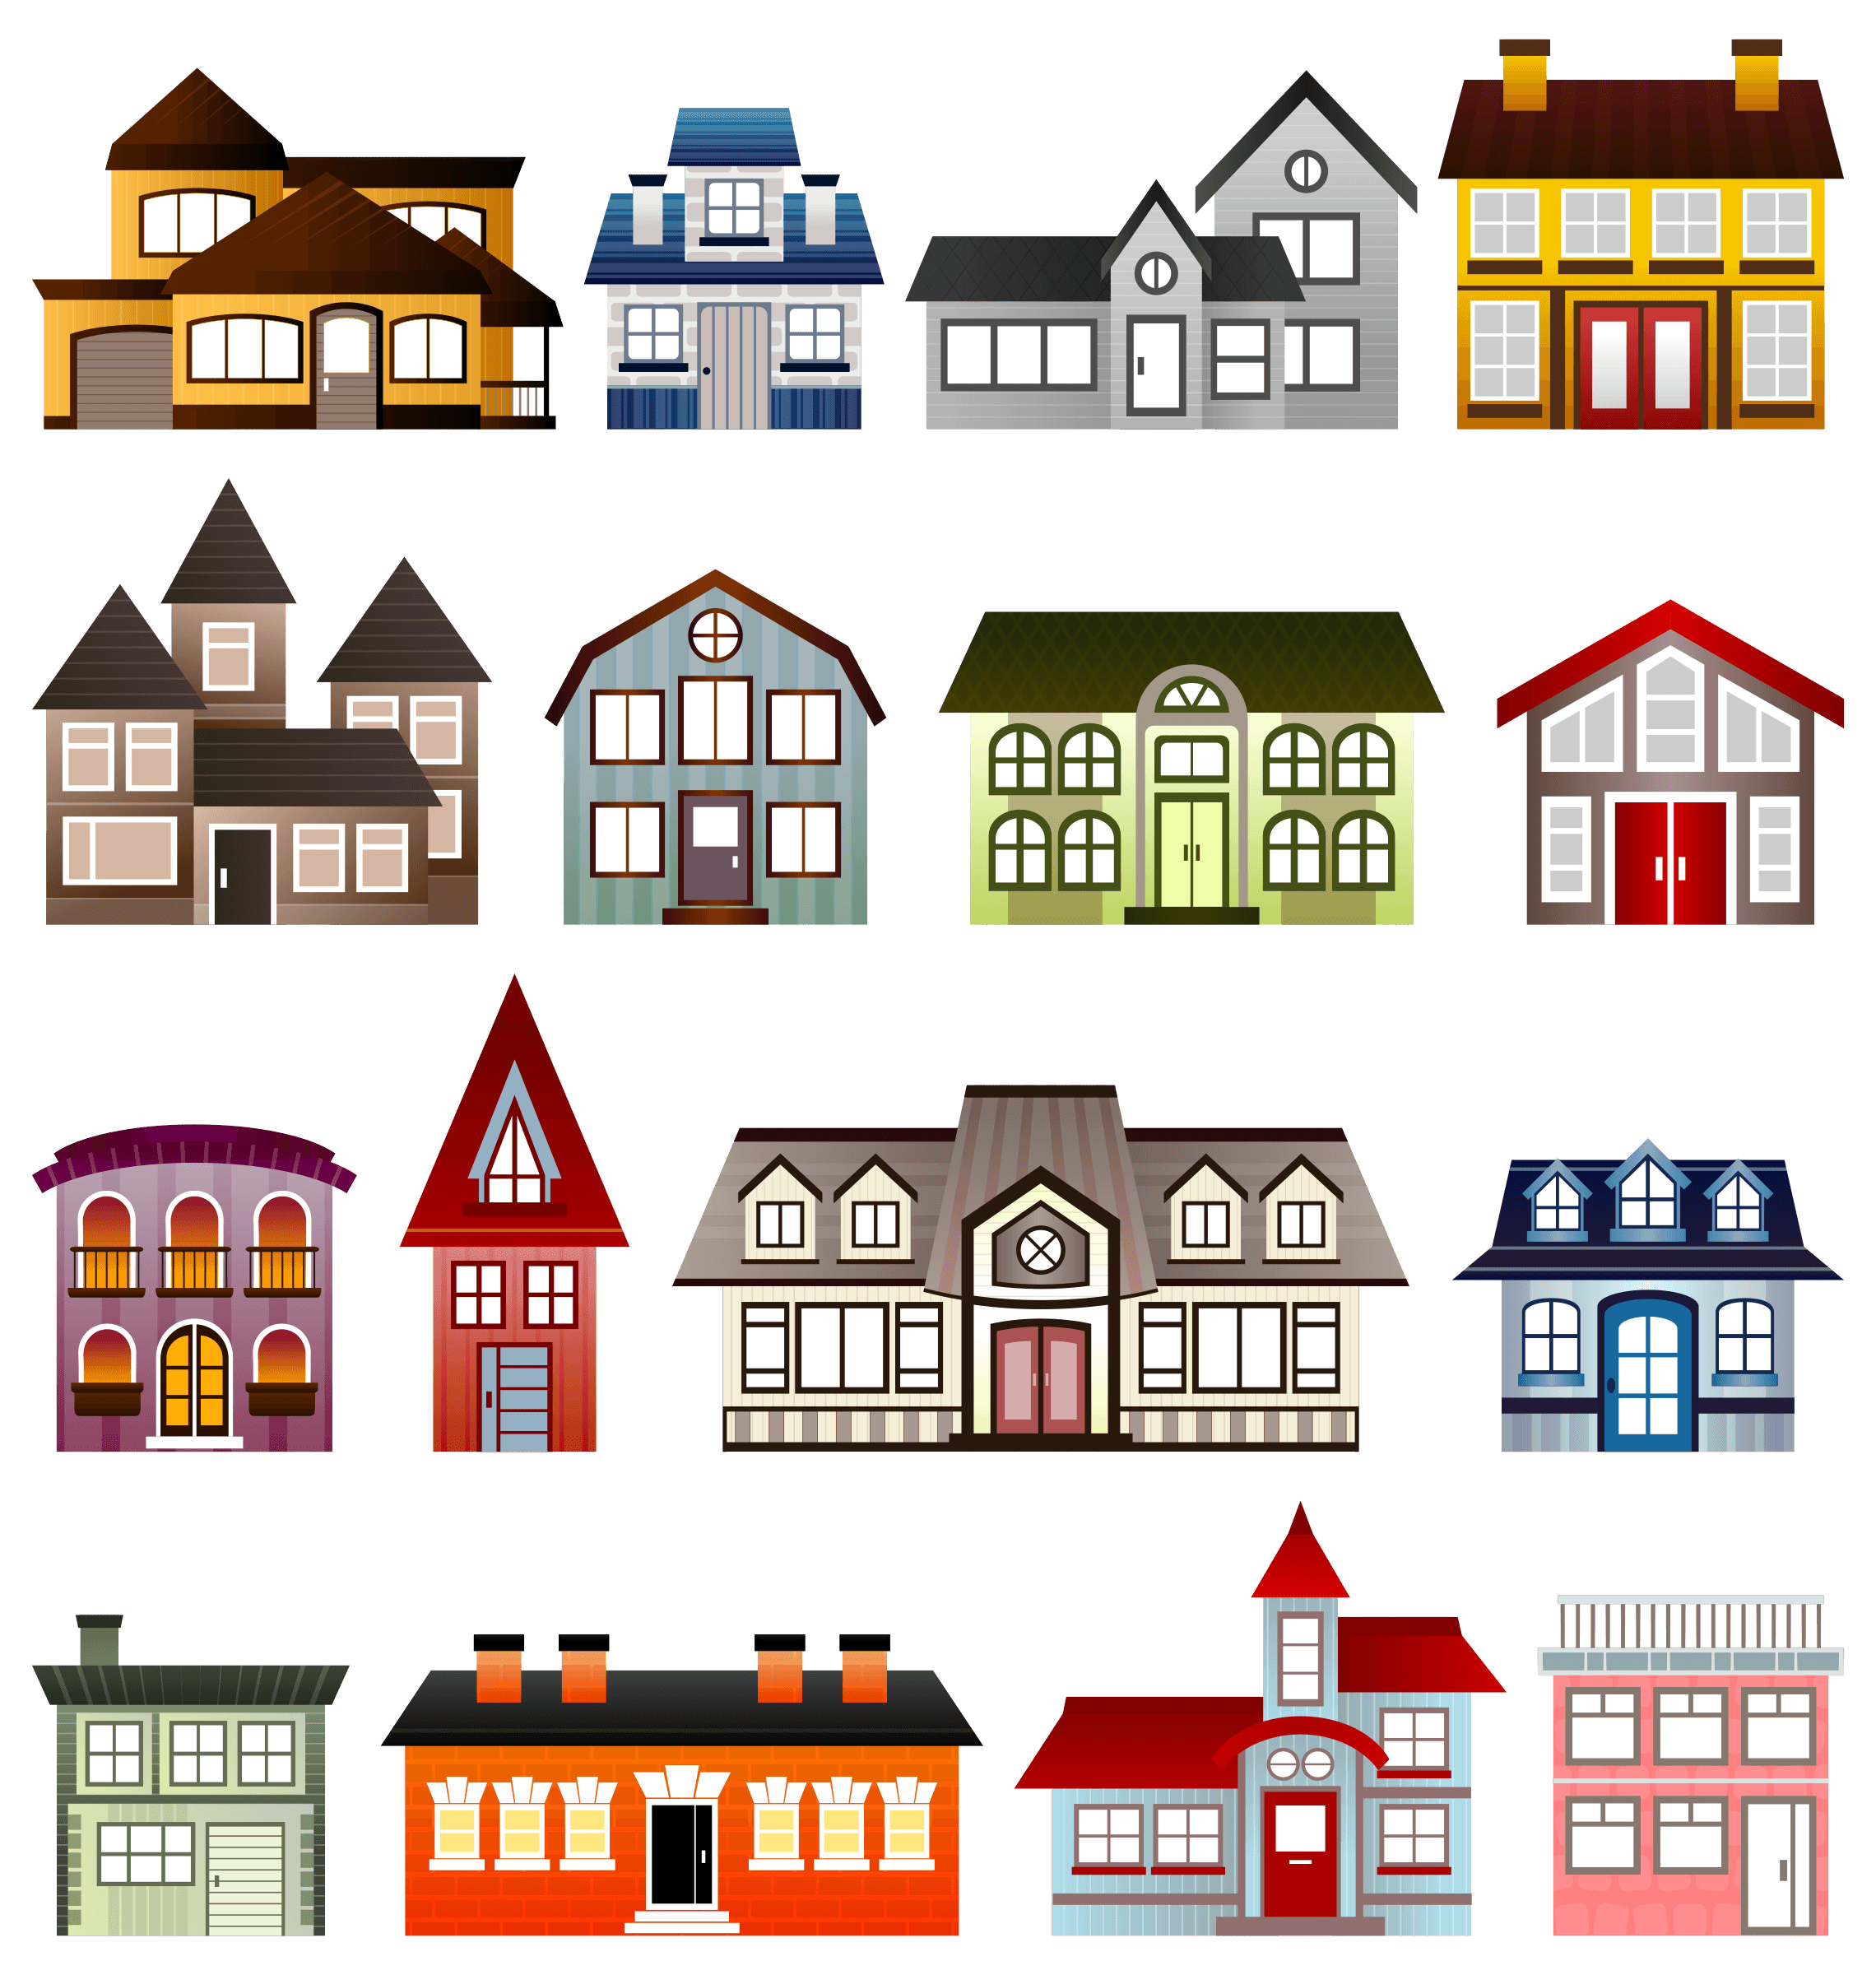 kutcha house and pucca house drawing  Clip Art Library